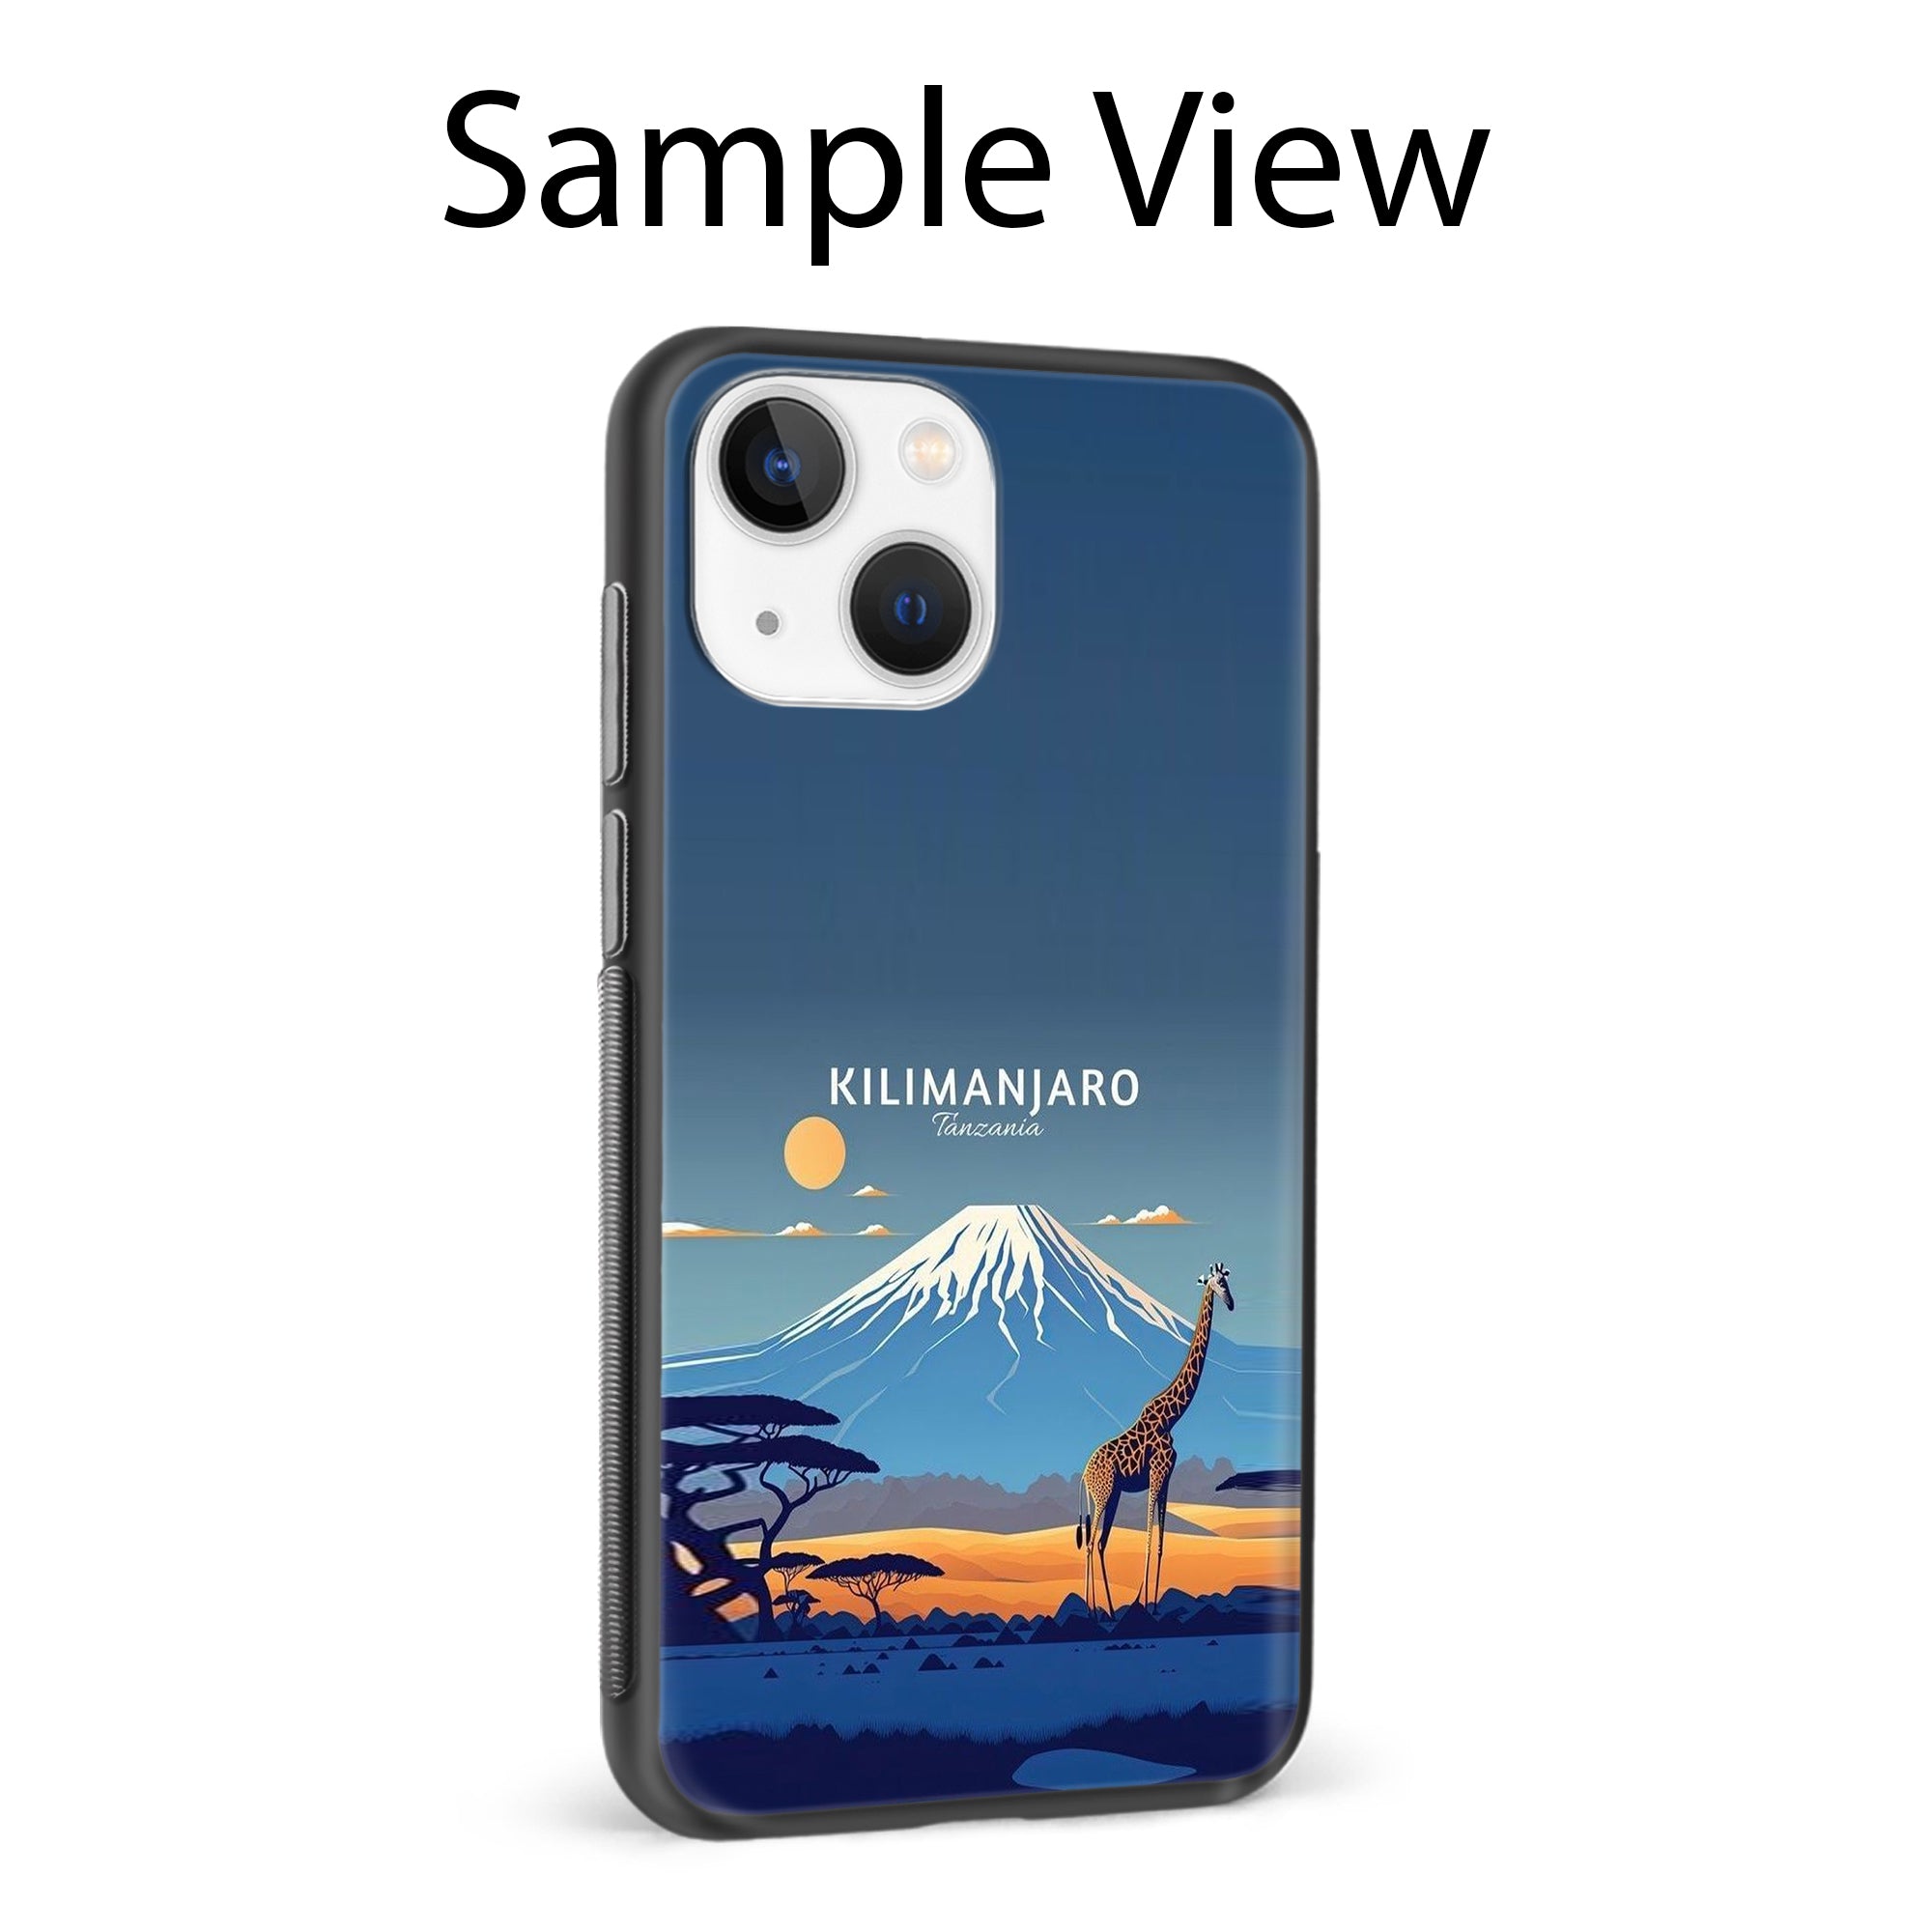 Buy Kilimanjaro Metal-Silicon Back Mobile Phone Case/Cover For Samsung Note 10 Plus (5G) Online